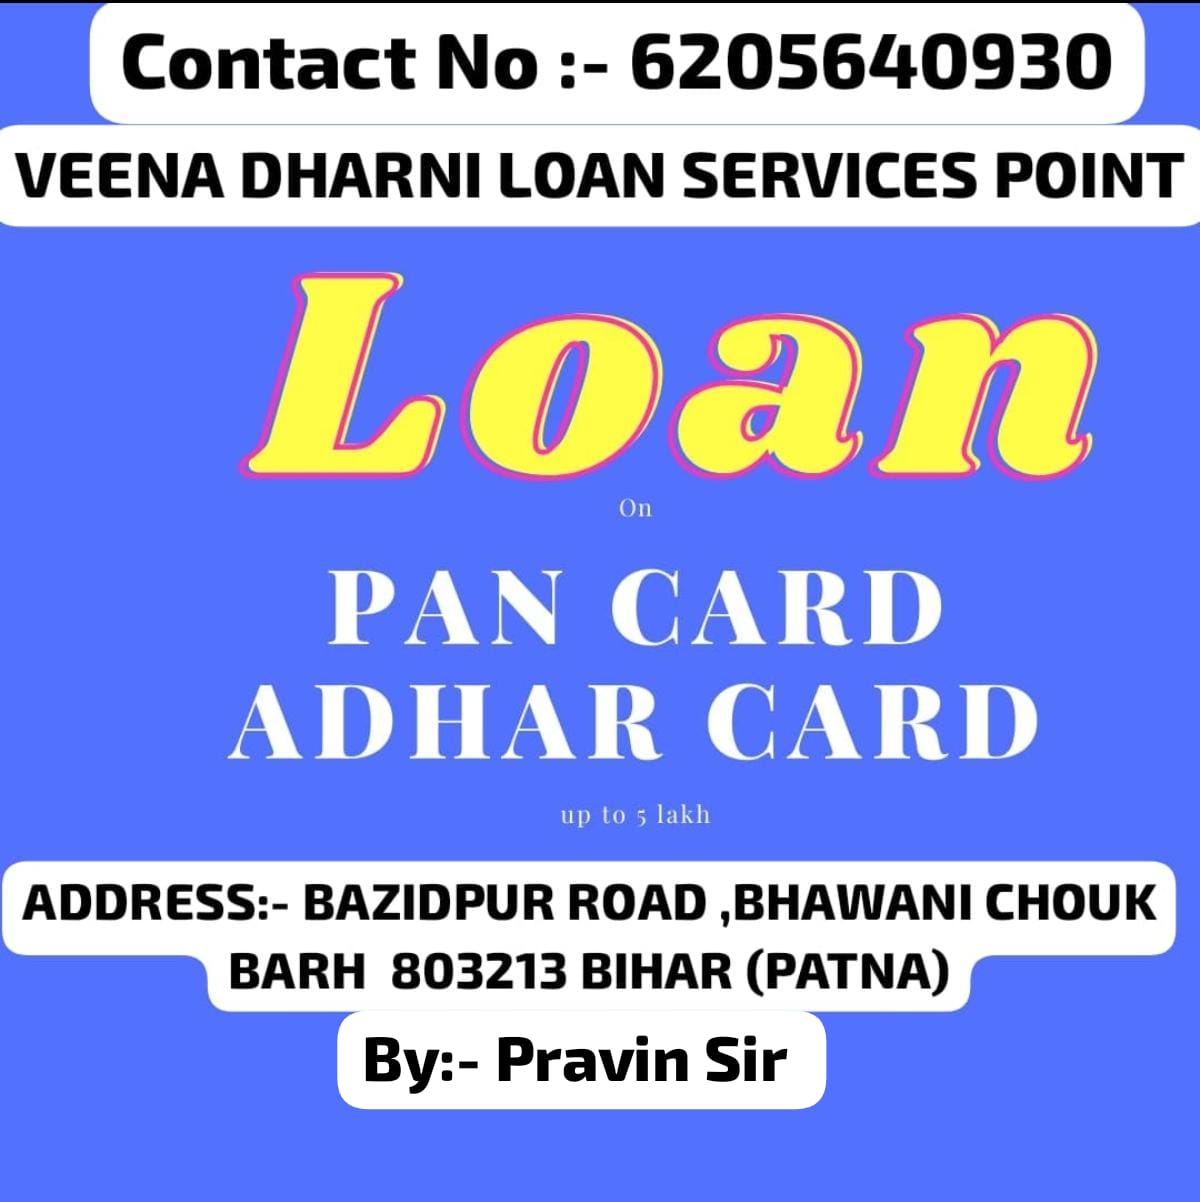 VEENA DHARNI LOAN SERVICES POINT